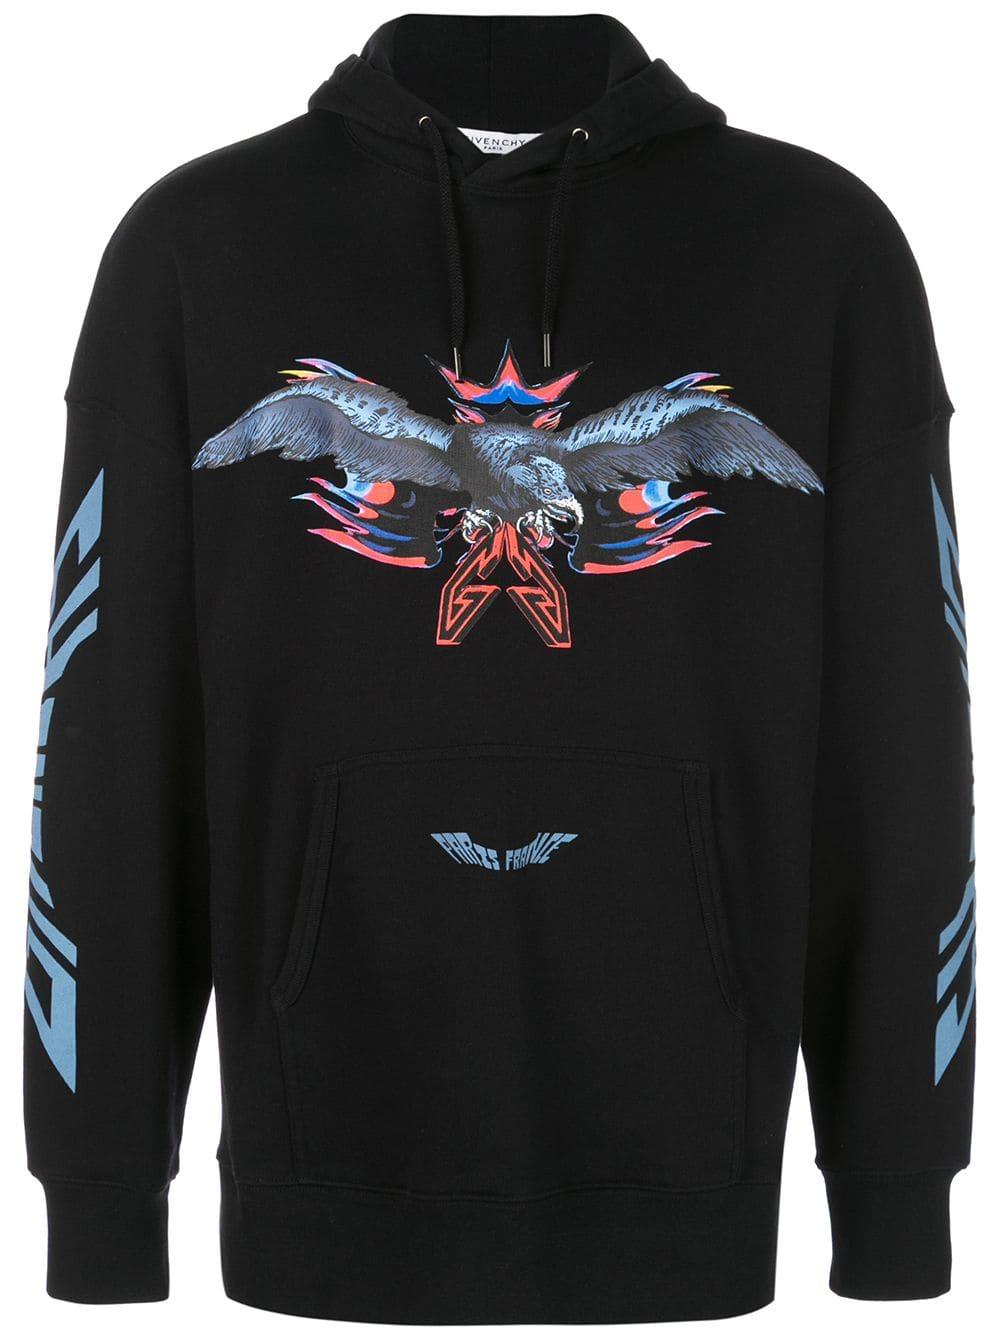 Givenchy Cotton Eagle Print Hoodie in Black for Men - Lyst